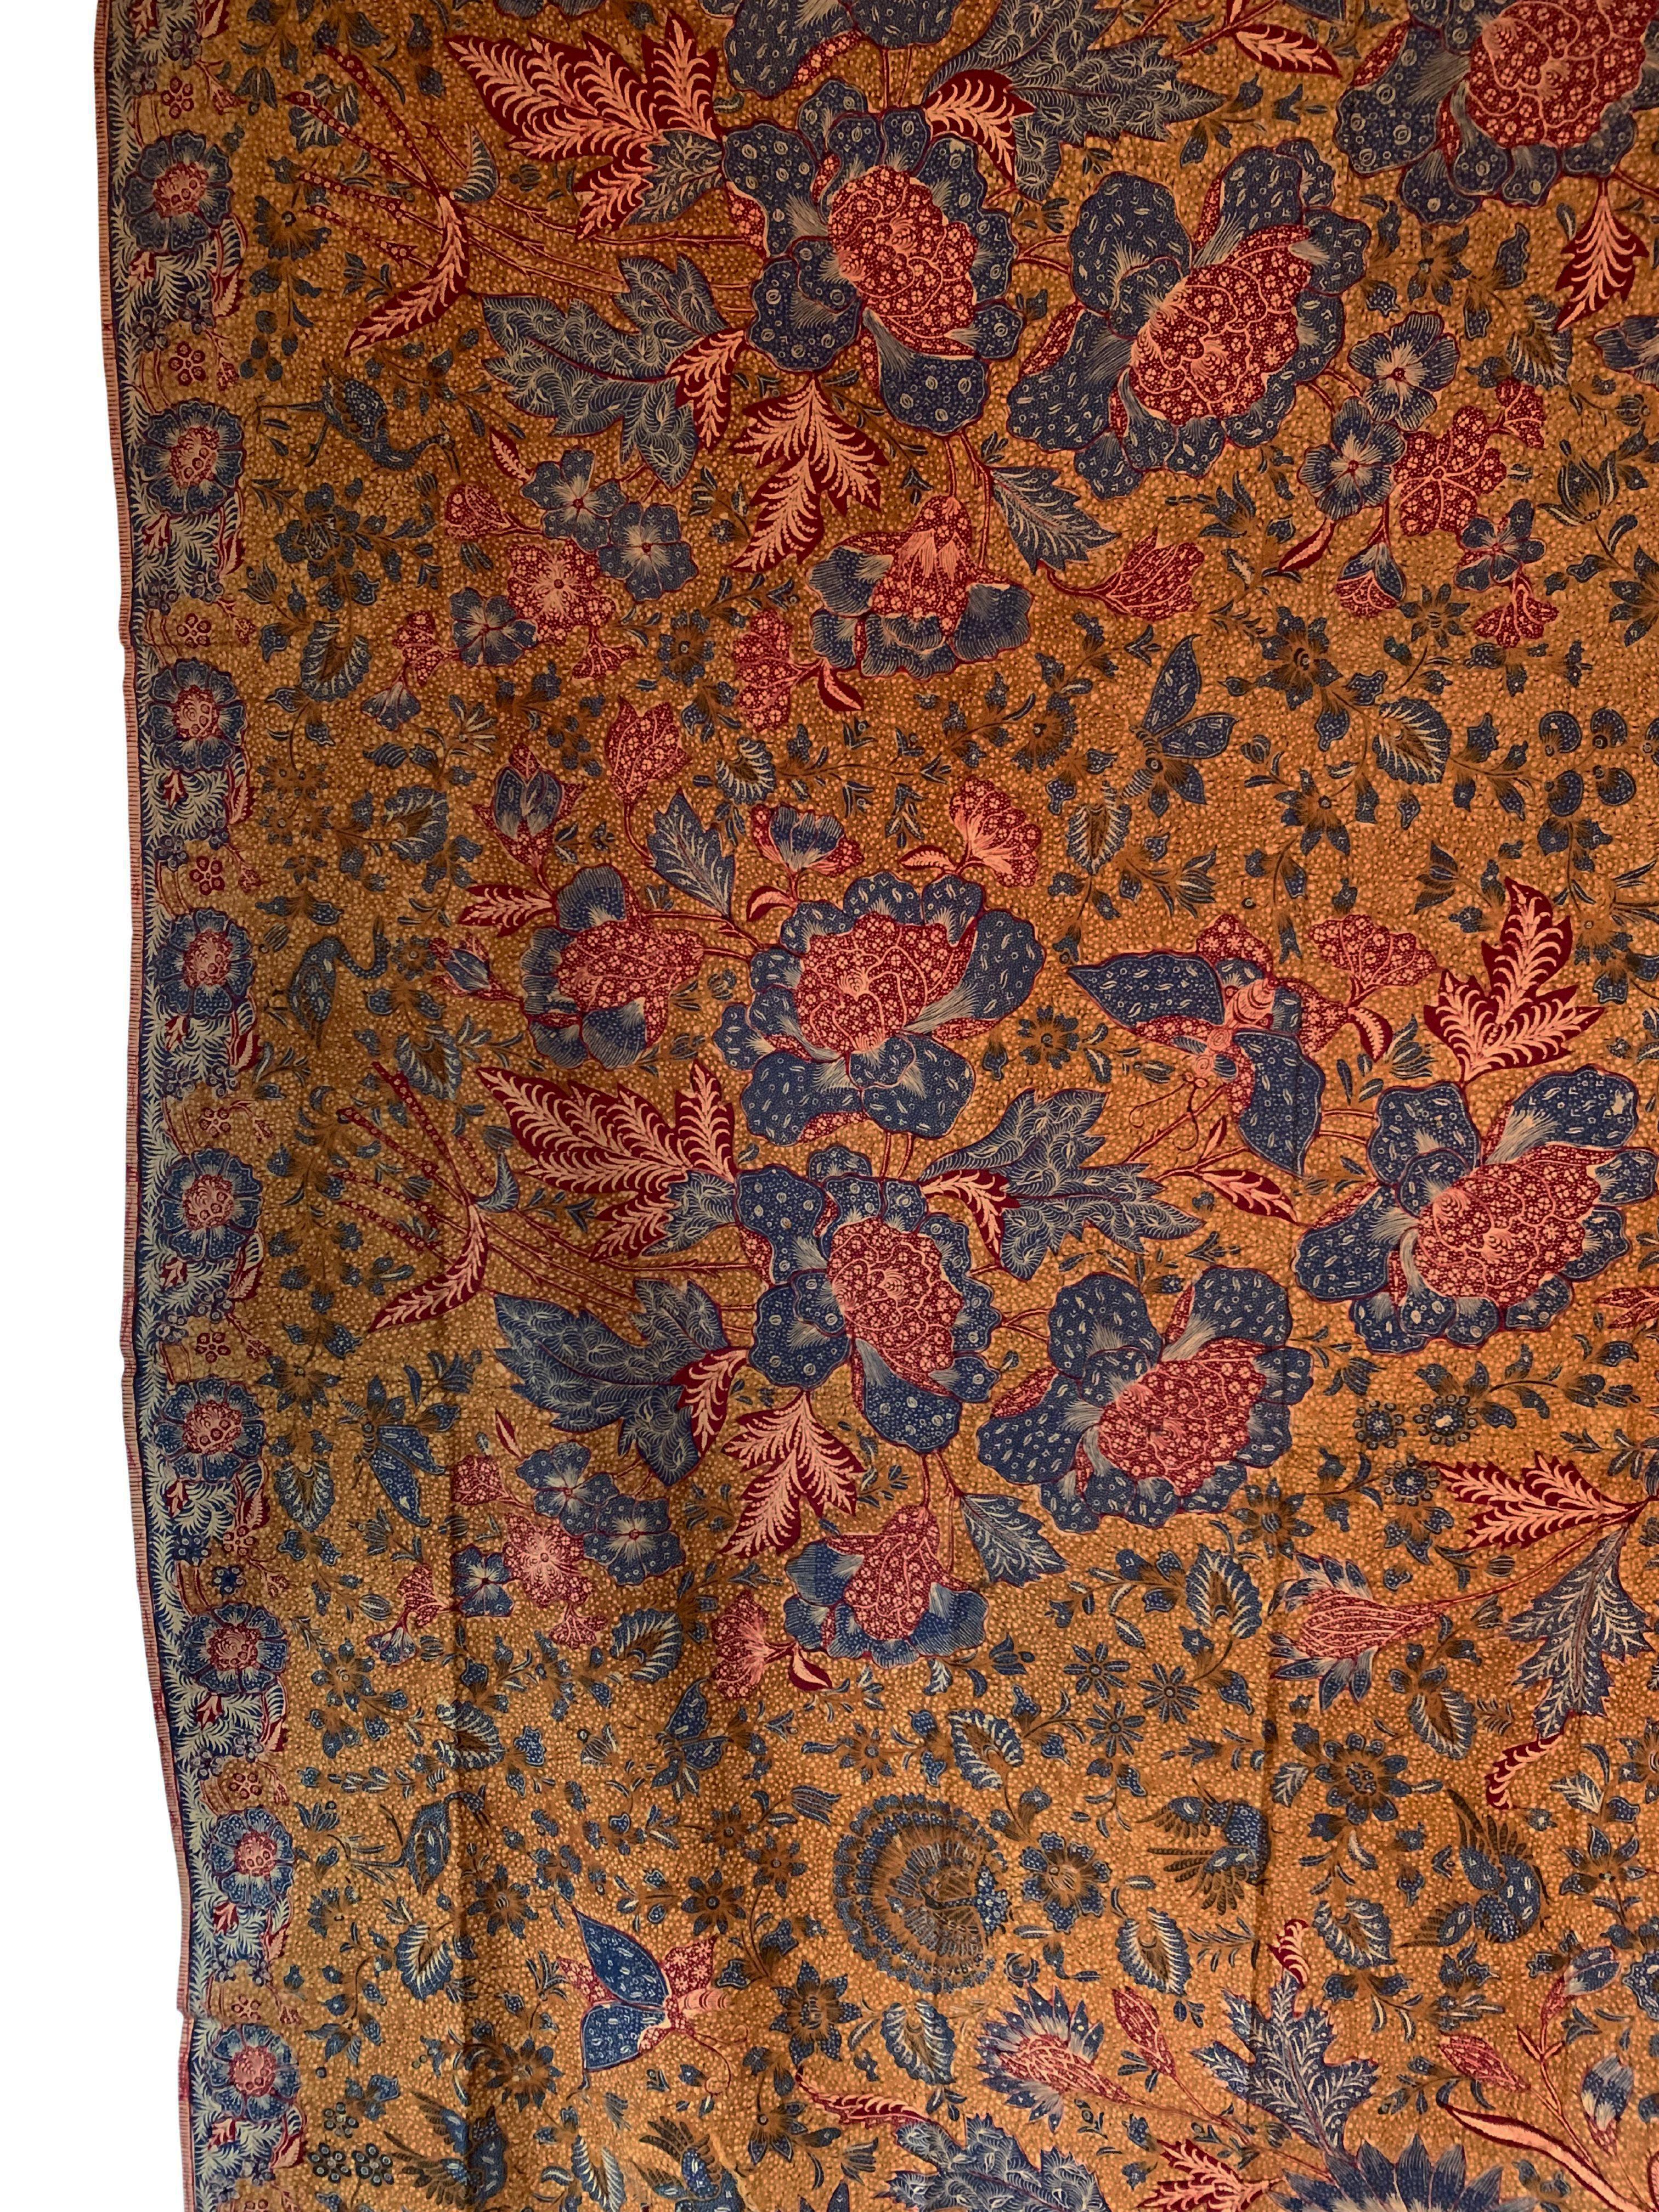 A fine example of a batik textile from Solo, Java, Indonesia. This textile features wonderful detailing & contrast. It features a wonderful array of floral, butterfly and bird motifs throughout. 

